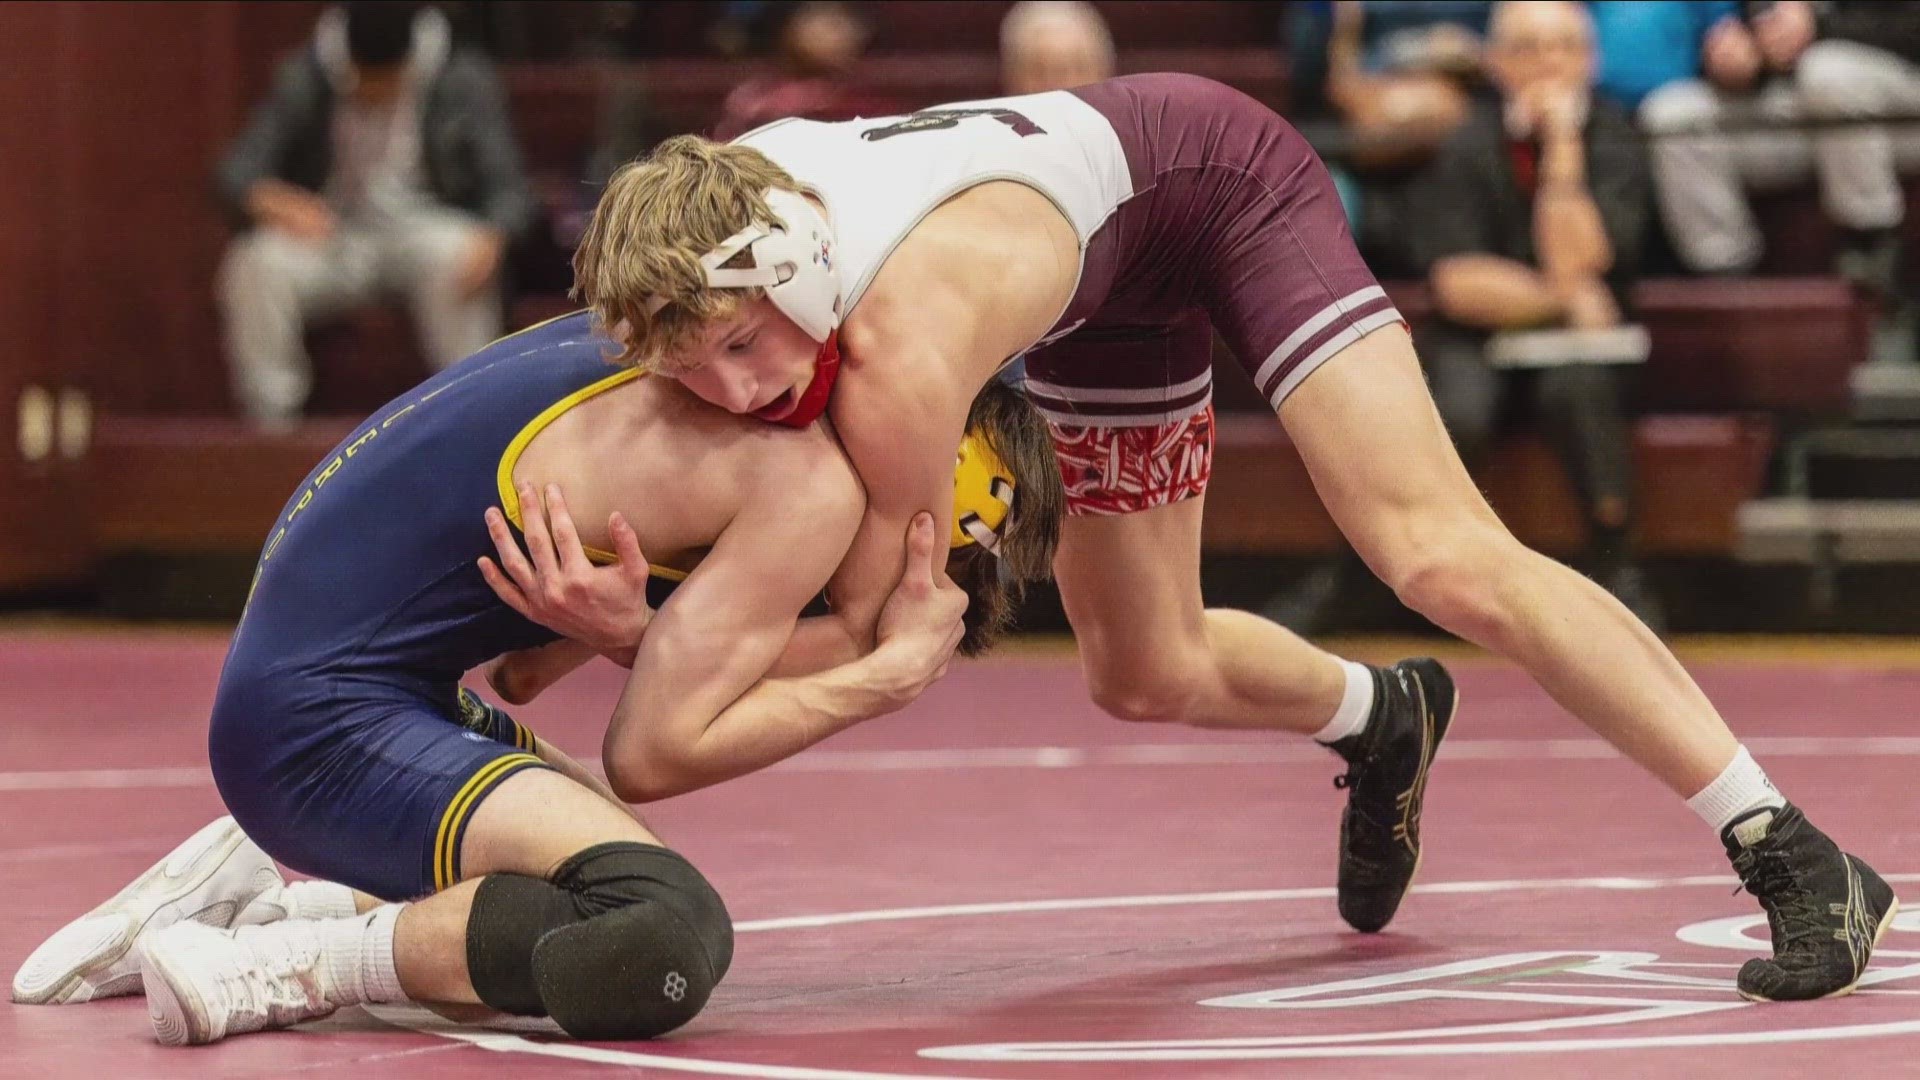 St. Joe's senior wrestler makes history with his 4th career title